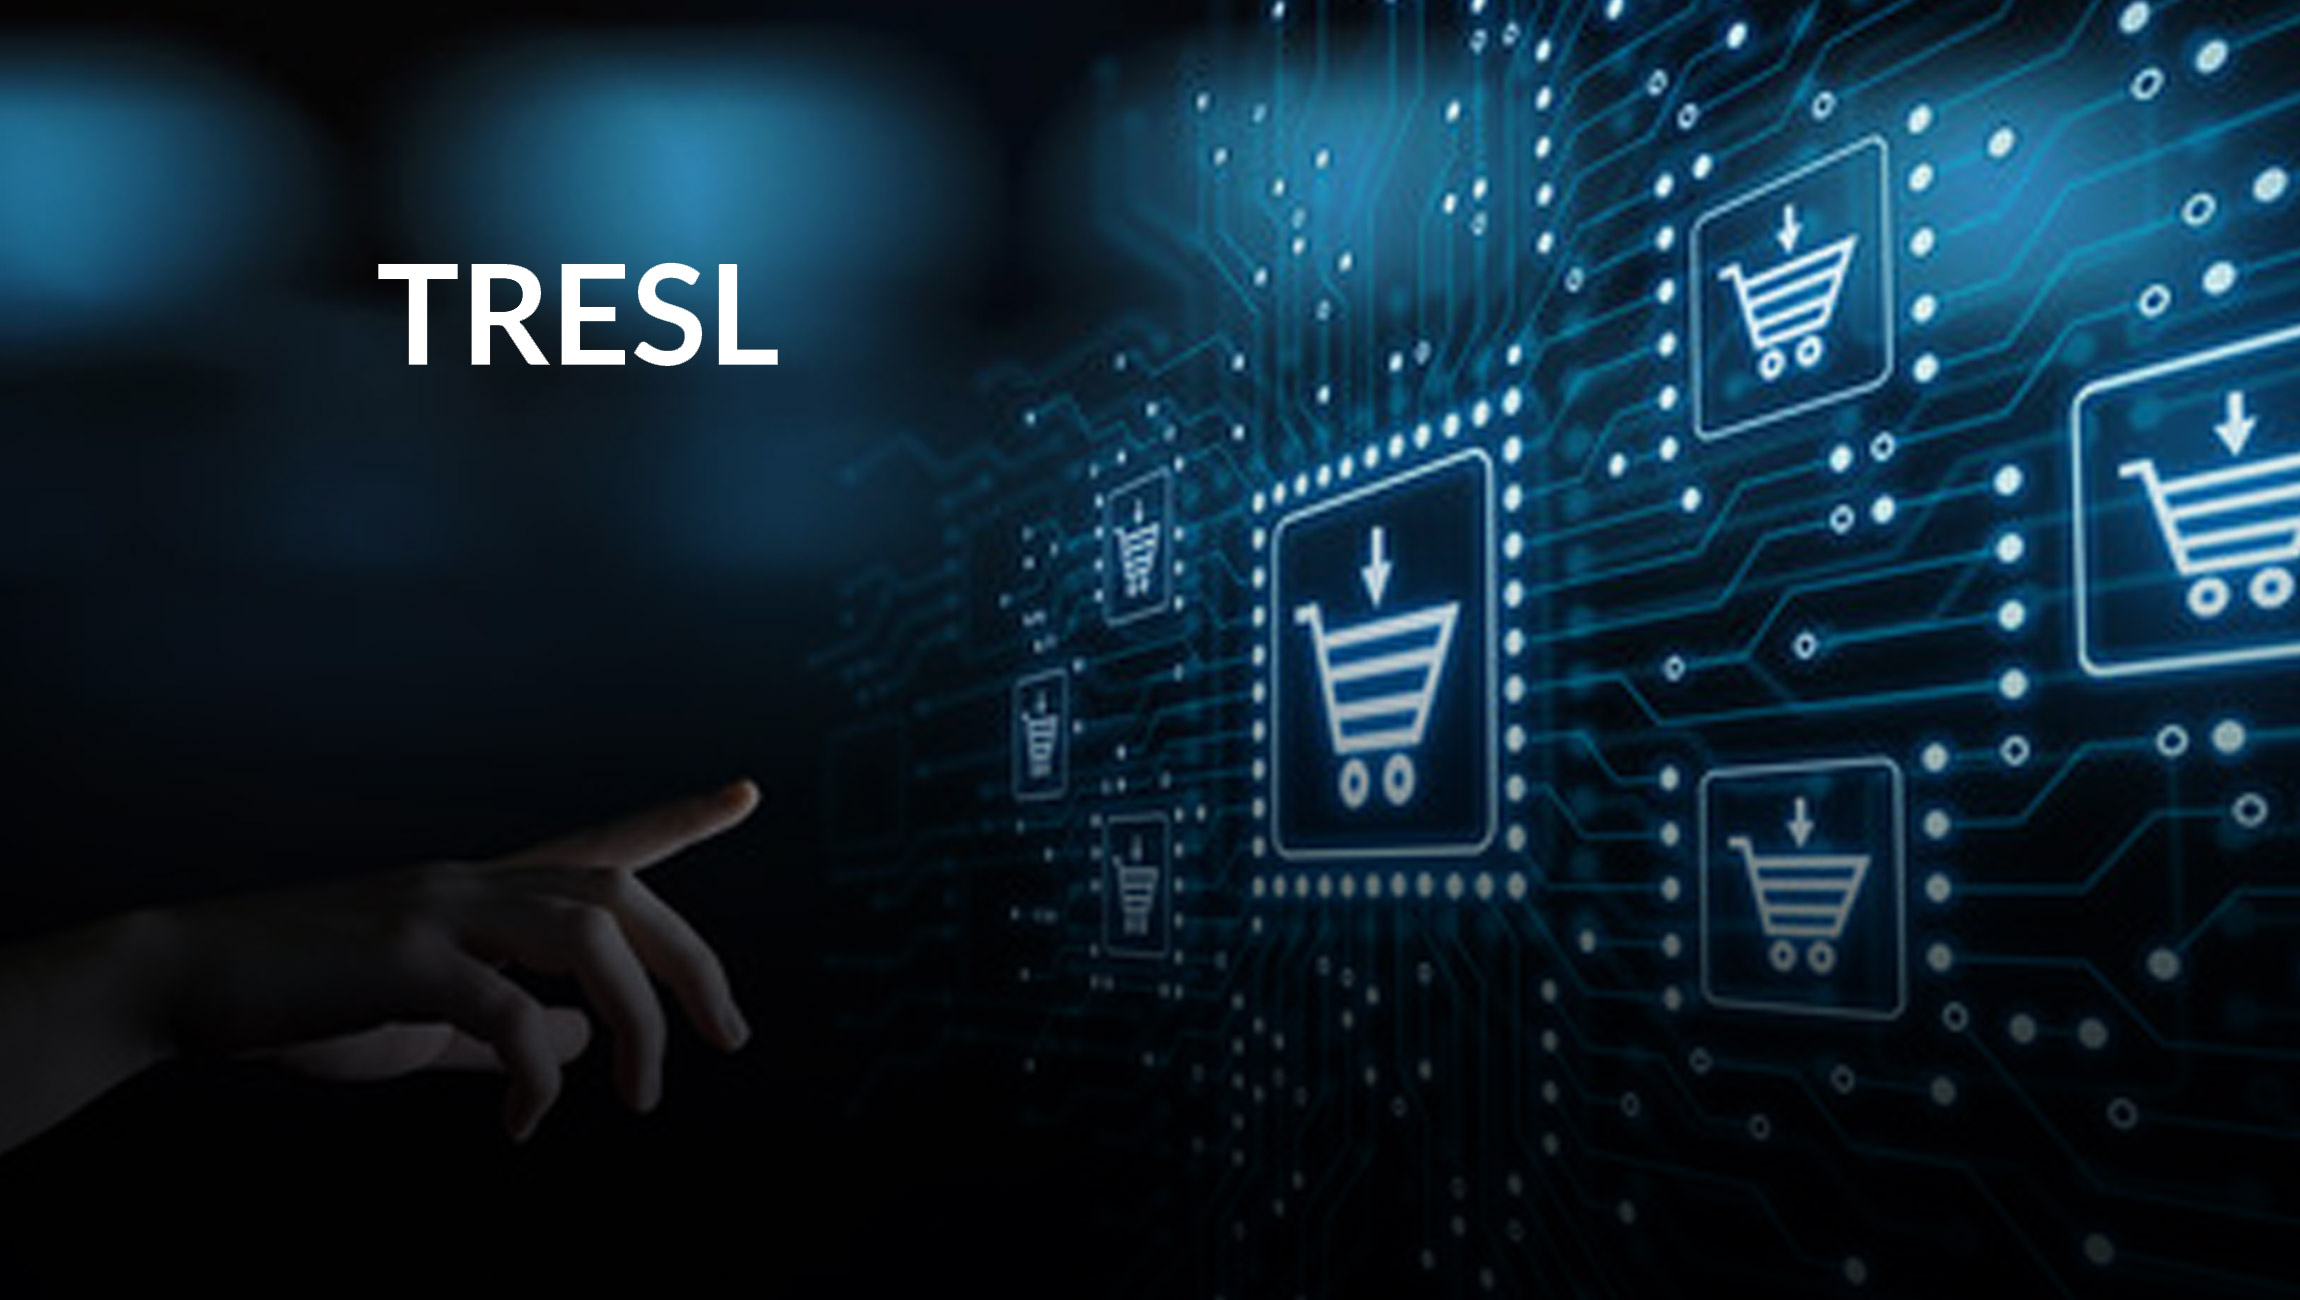 CES 2021 Tresl’s Data Intelligence Platform, Segments Analytics, Helps E-Commerce Brands on Shopify Understand Their Customers Better to Optimize Marketing Efforts